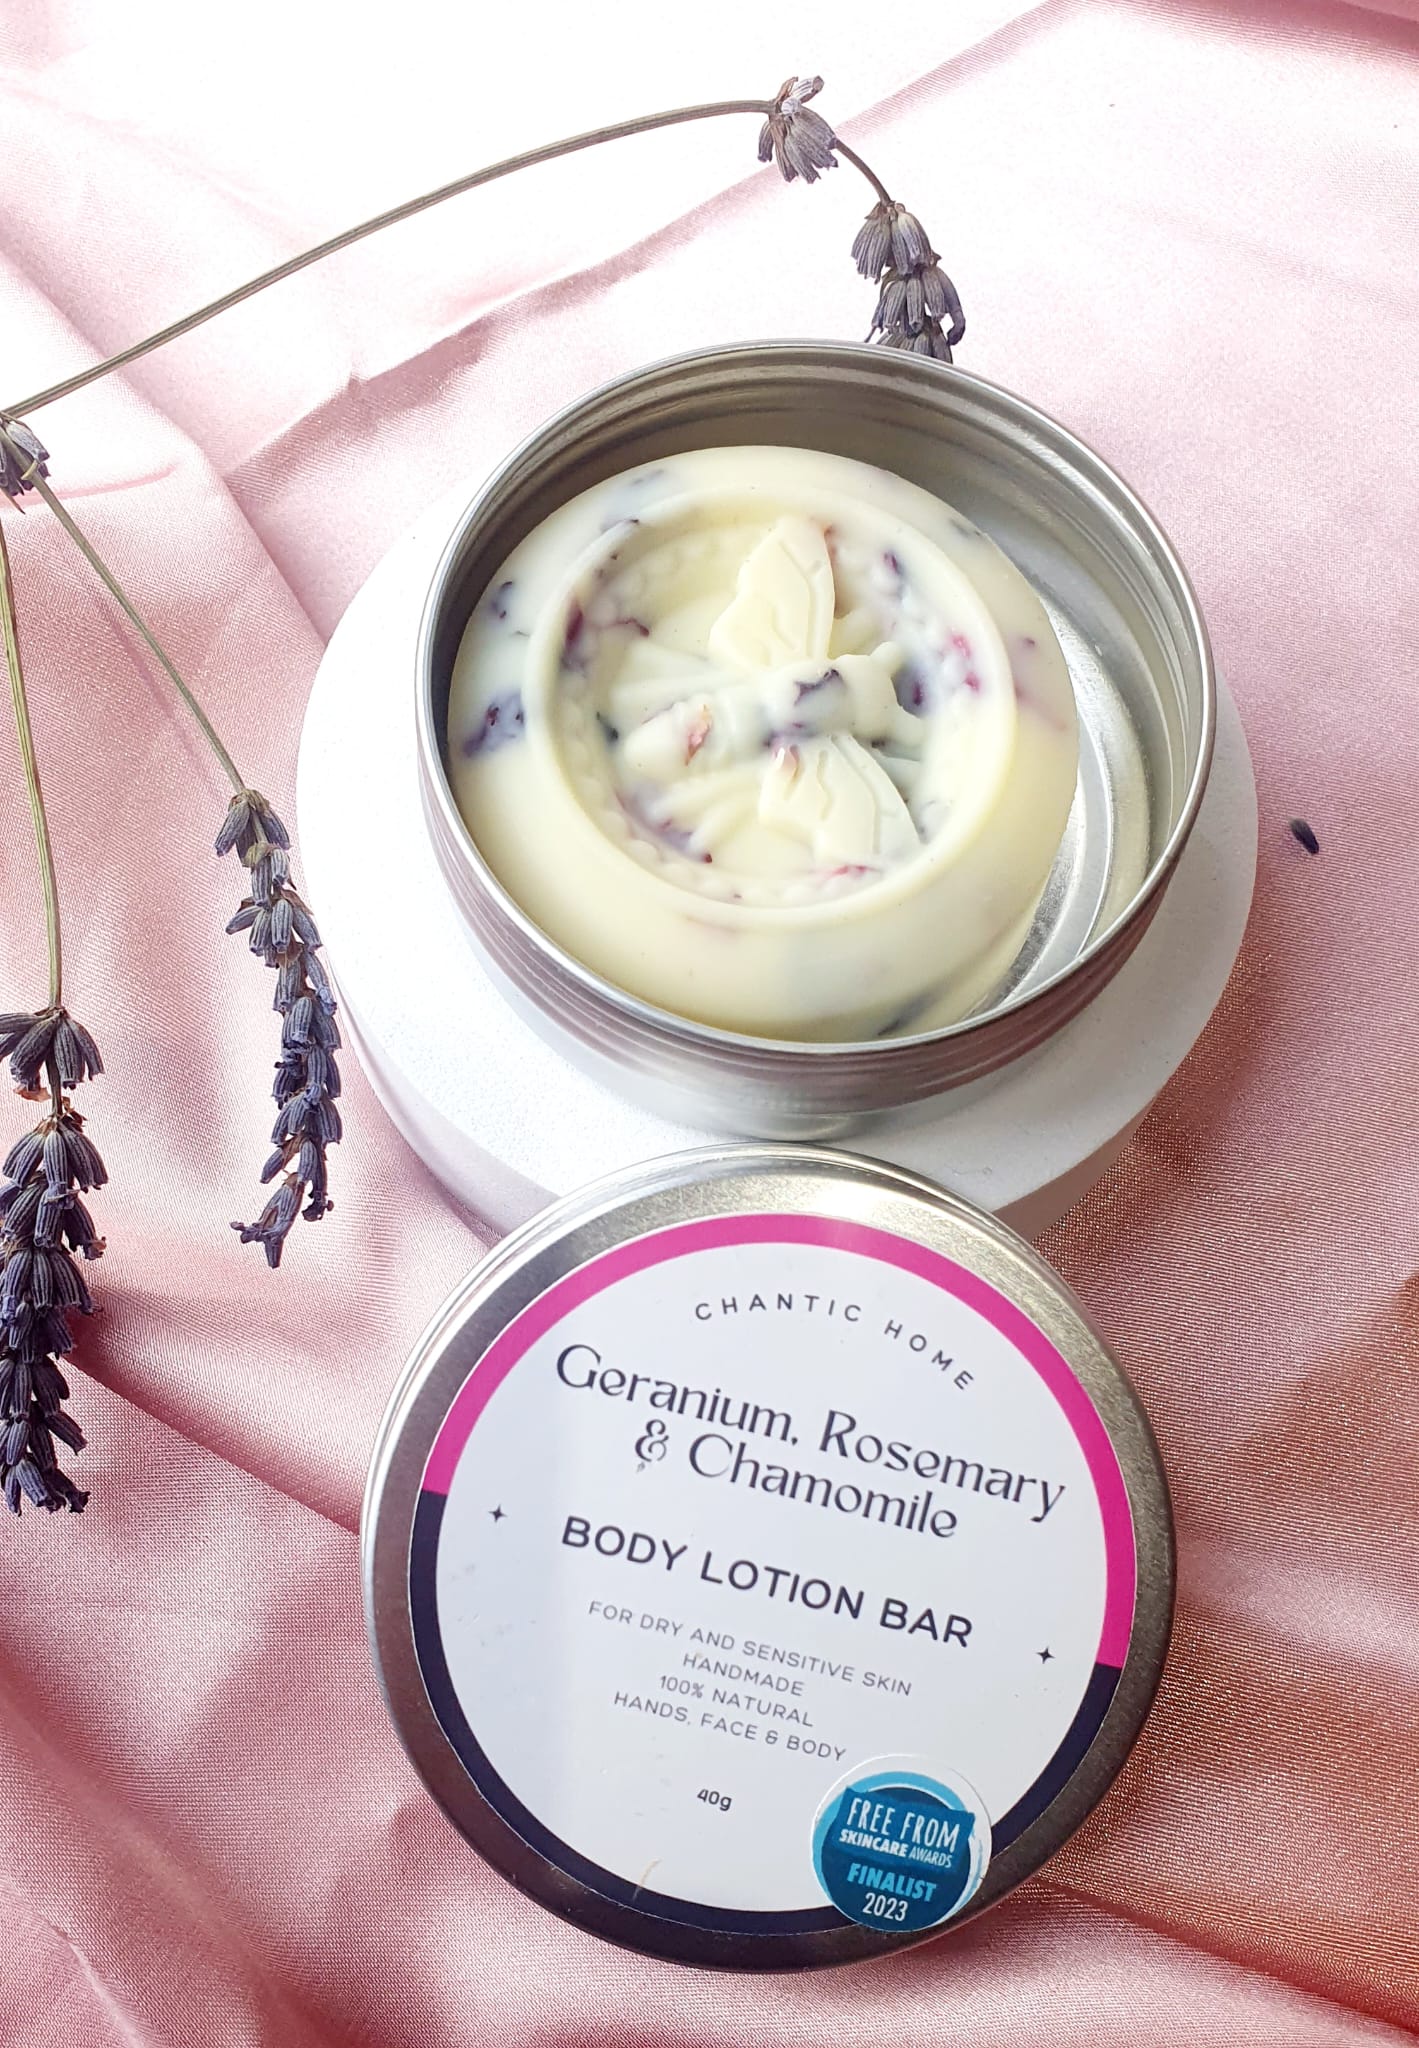 Scented Solid Body Lotion Bar, Cocoa Butter, Coconut Oil & Beeswax